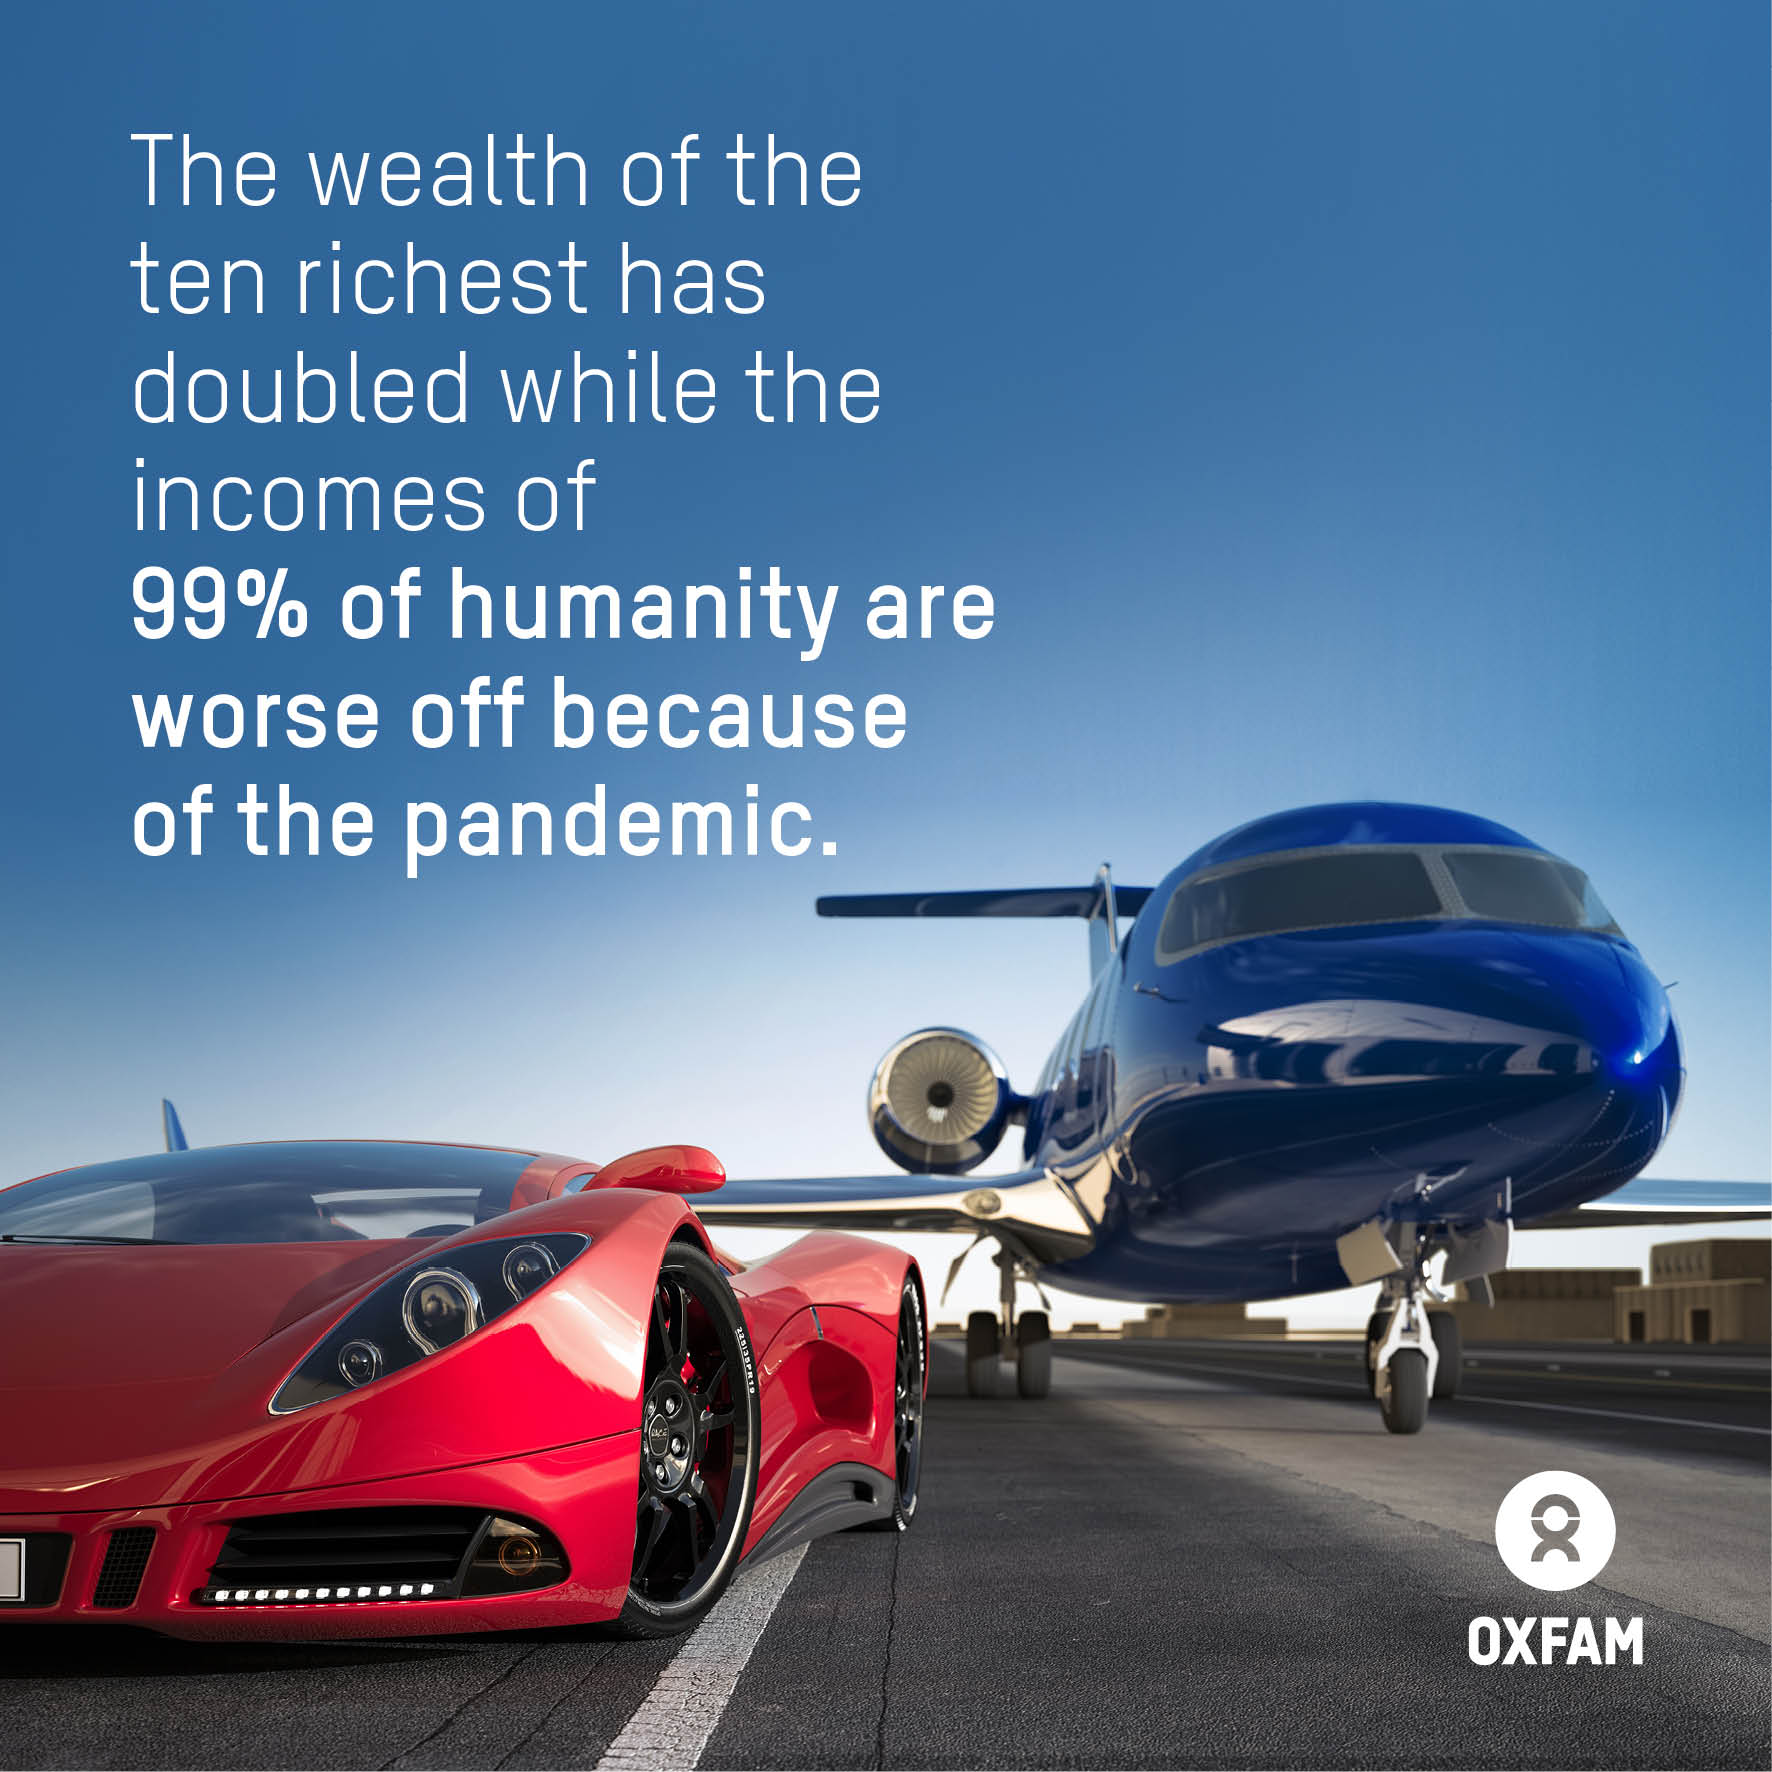 The wealth of the 10 richest has doubled while the incomes of 99% of humanity have fallen during the pandemic